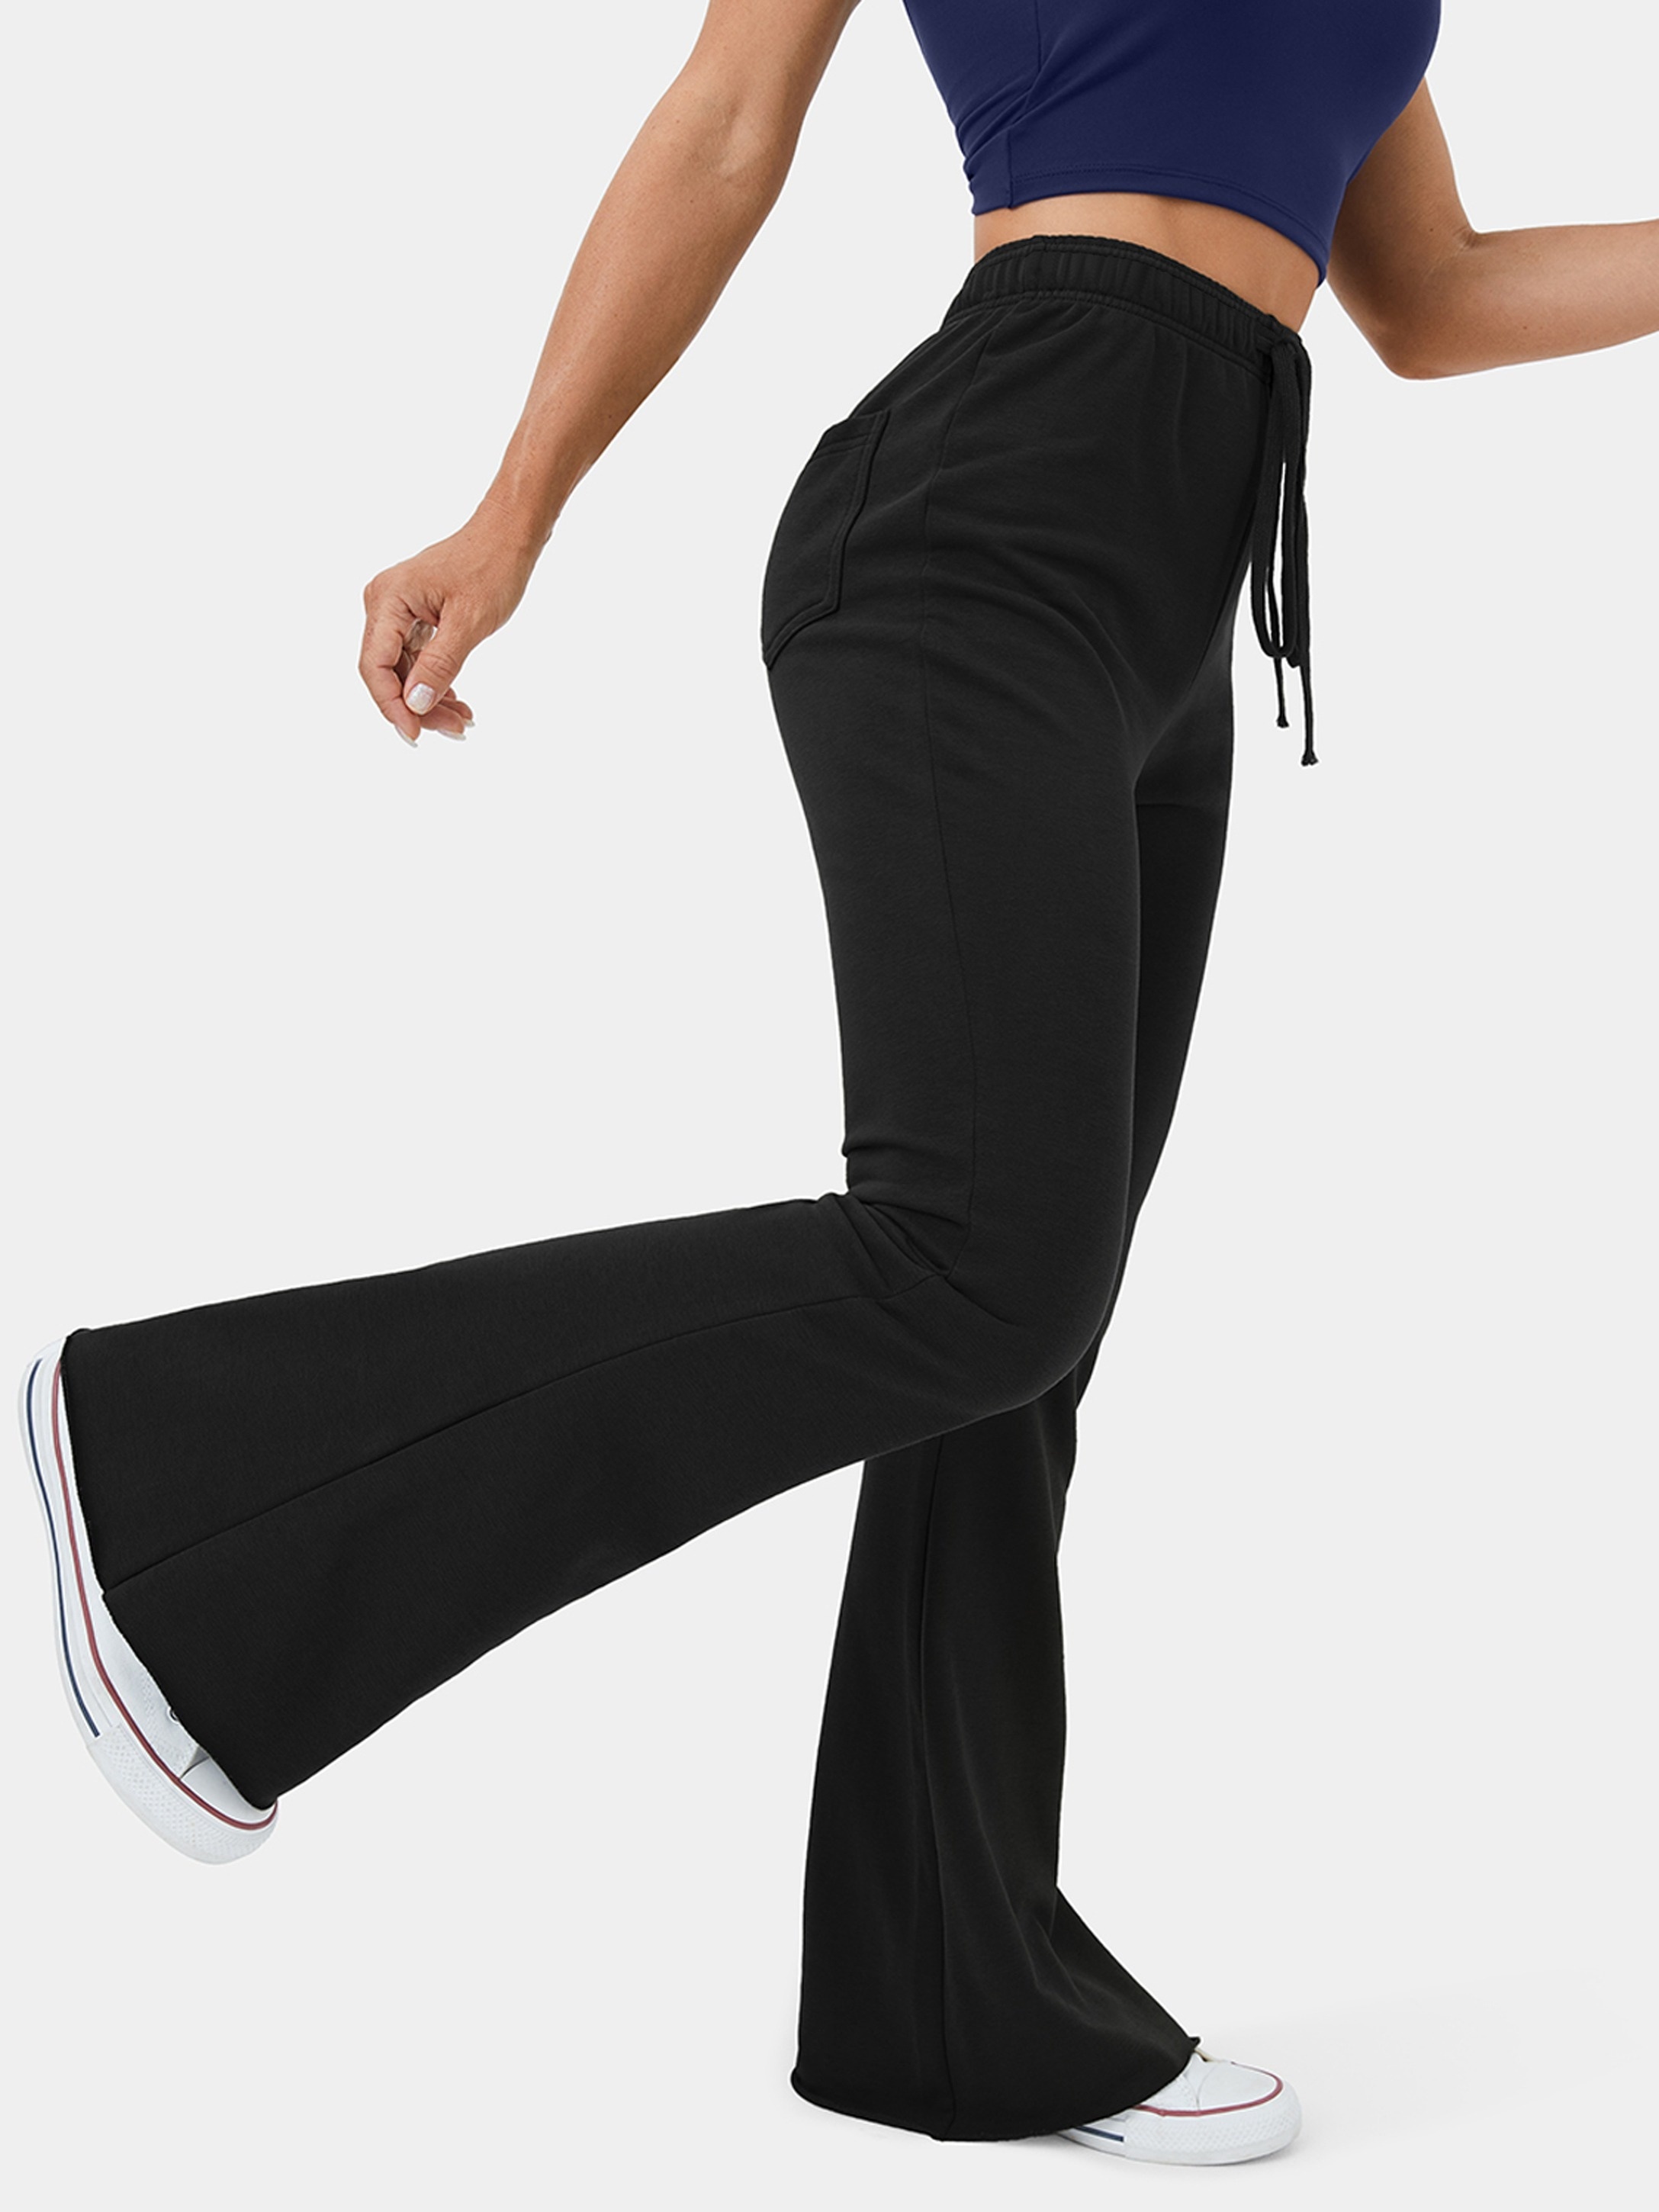 Fesfesfes Dressy Pants for Women Casual Slim Fit Wear to Work Trousers High  Elastic Waist Stretchy Pants Solid Color Sports Yoga Flared Pants 